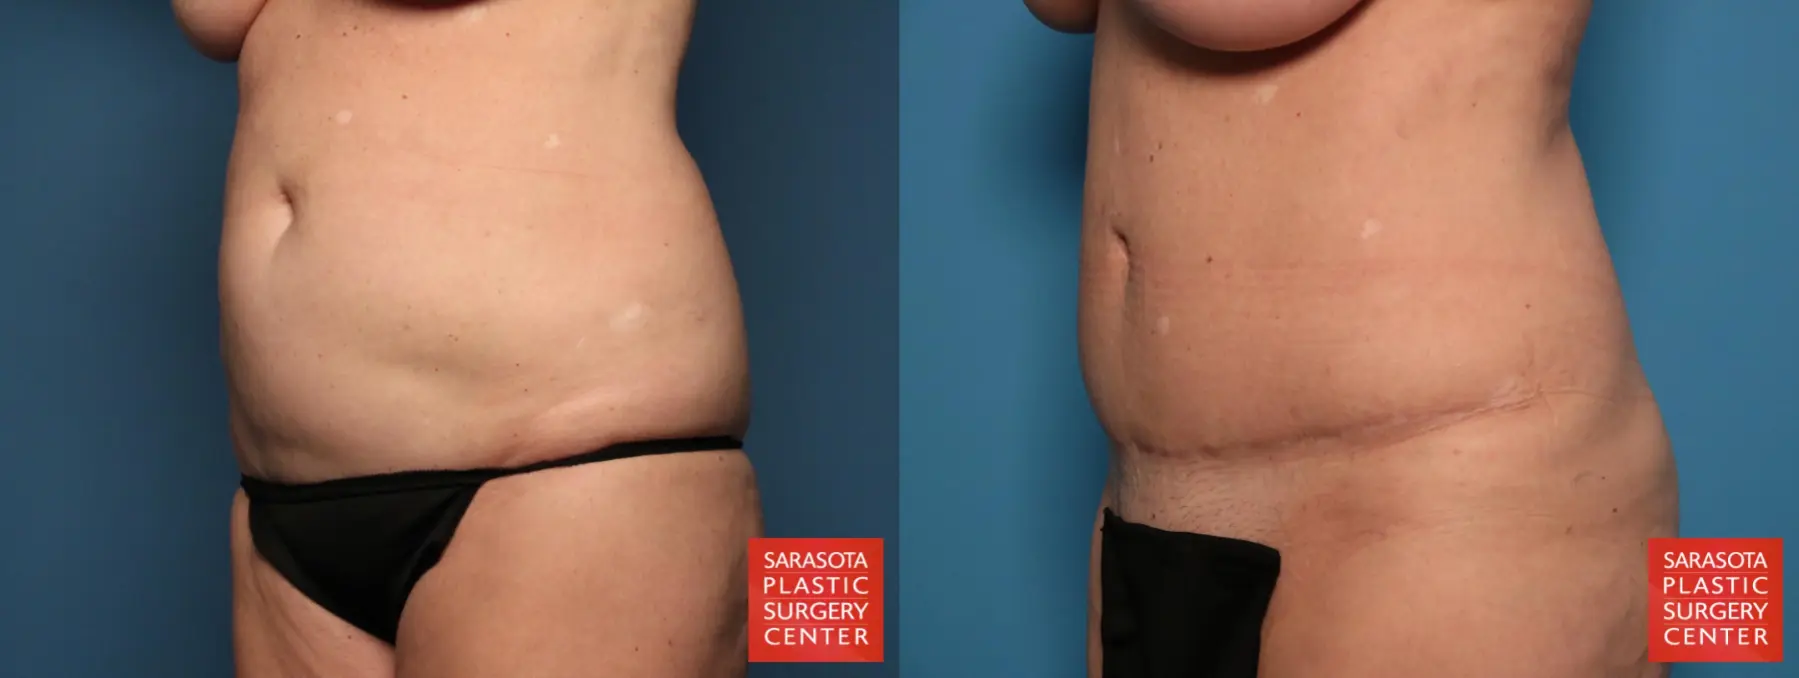 Tummy Tuck: Patient 19 - Before and After 2